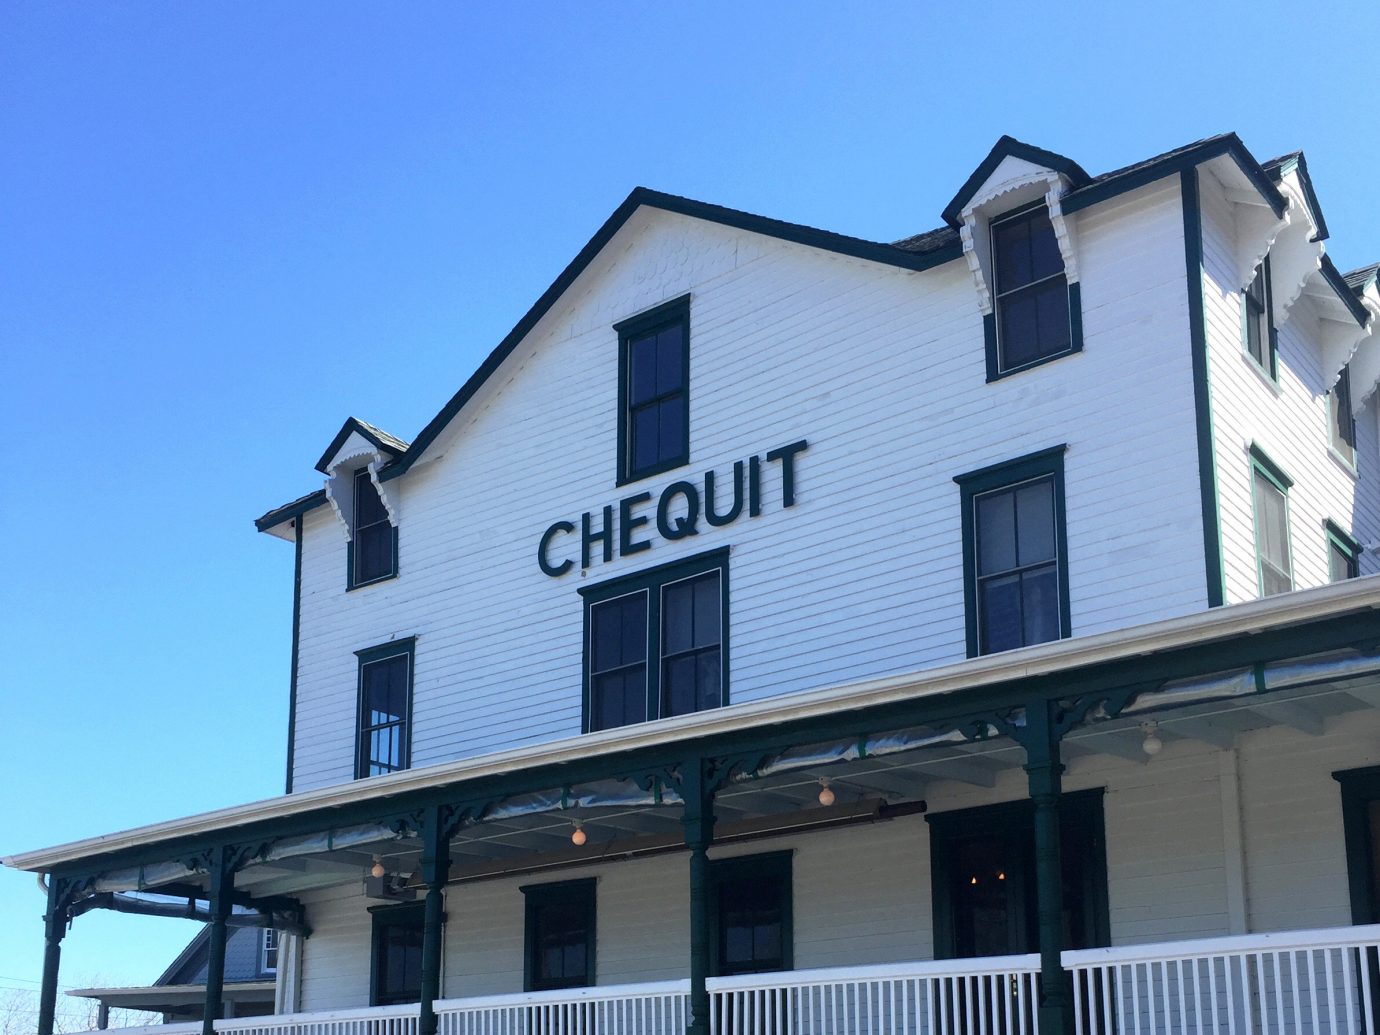 Exterior of The Chequit, Shelter Island, NY